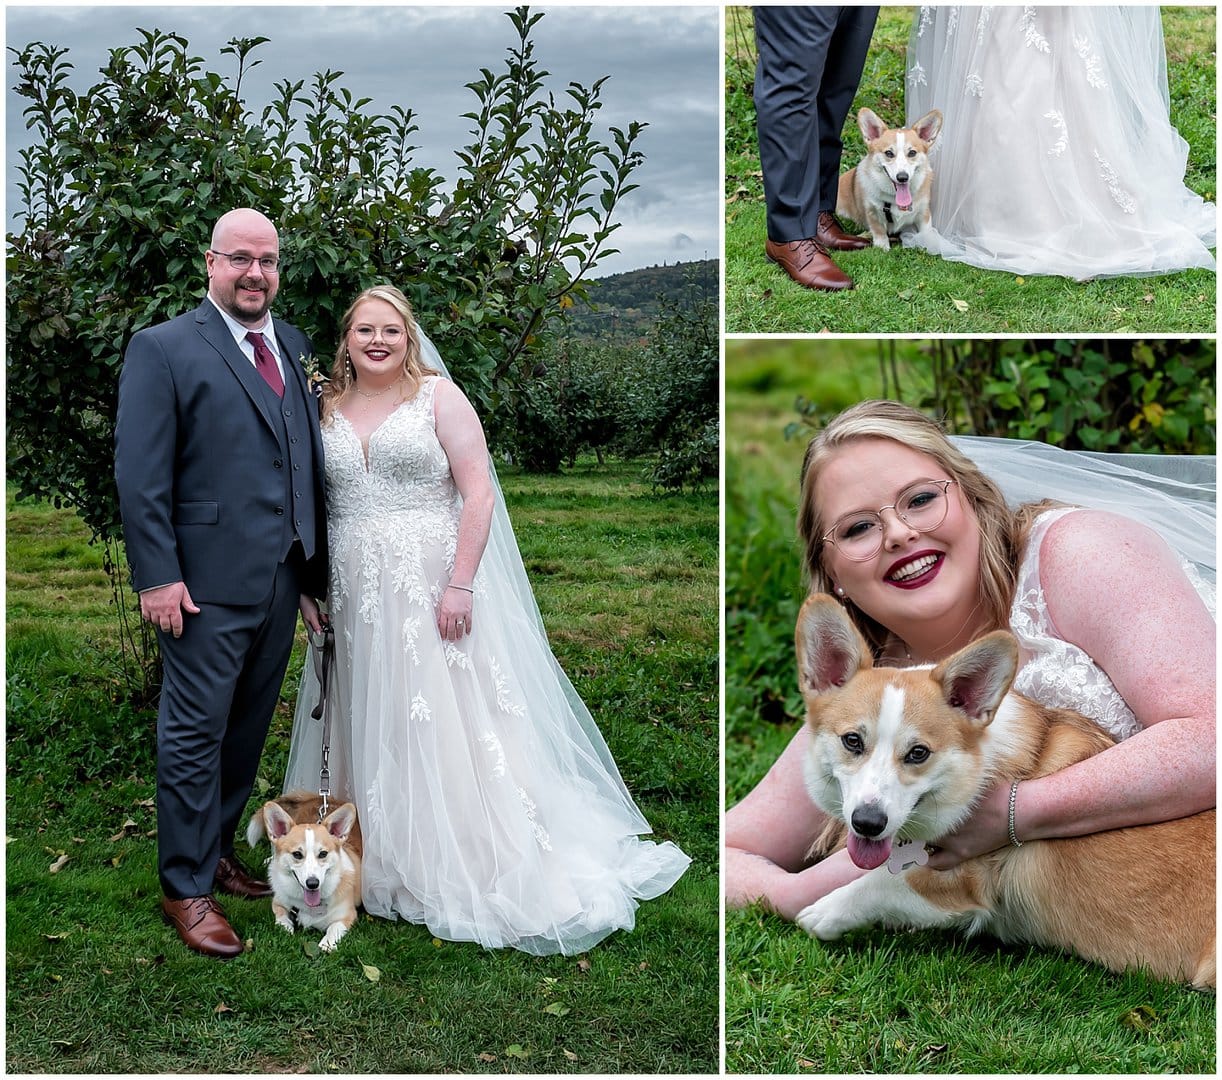 The bride and groom pose for wedding photos with their dog at the Bent Ridge Winery in NS.